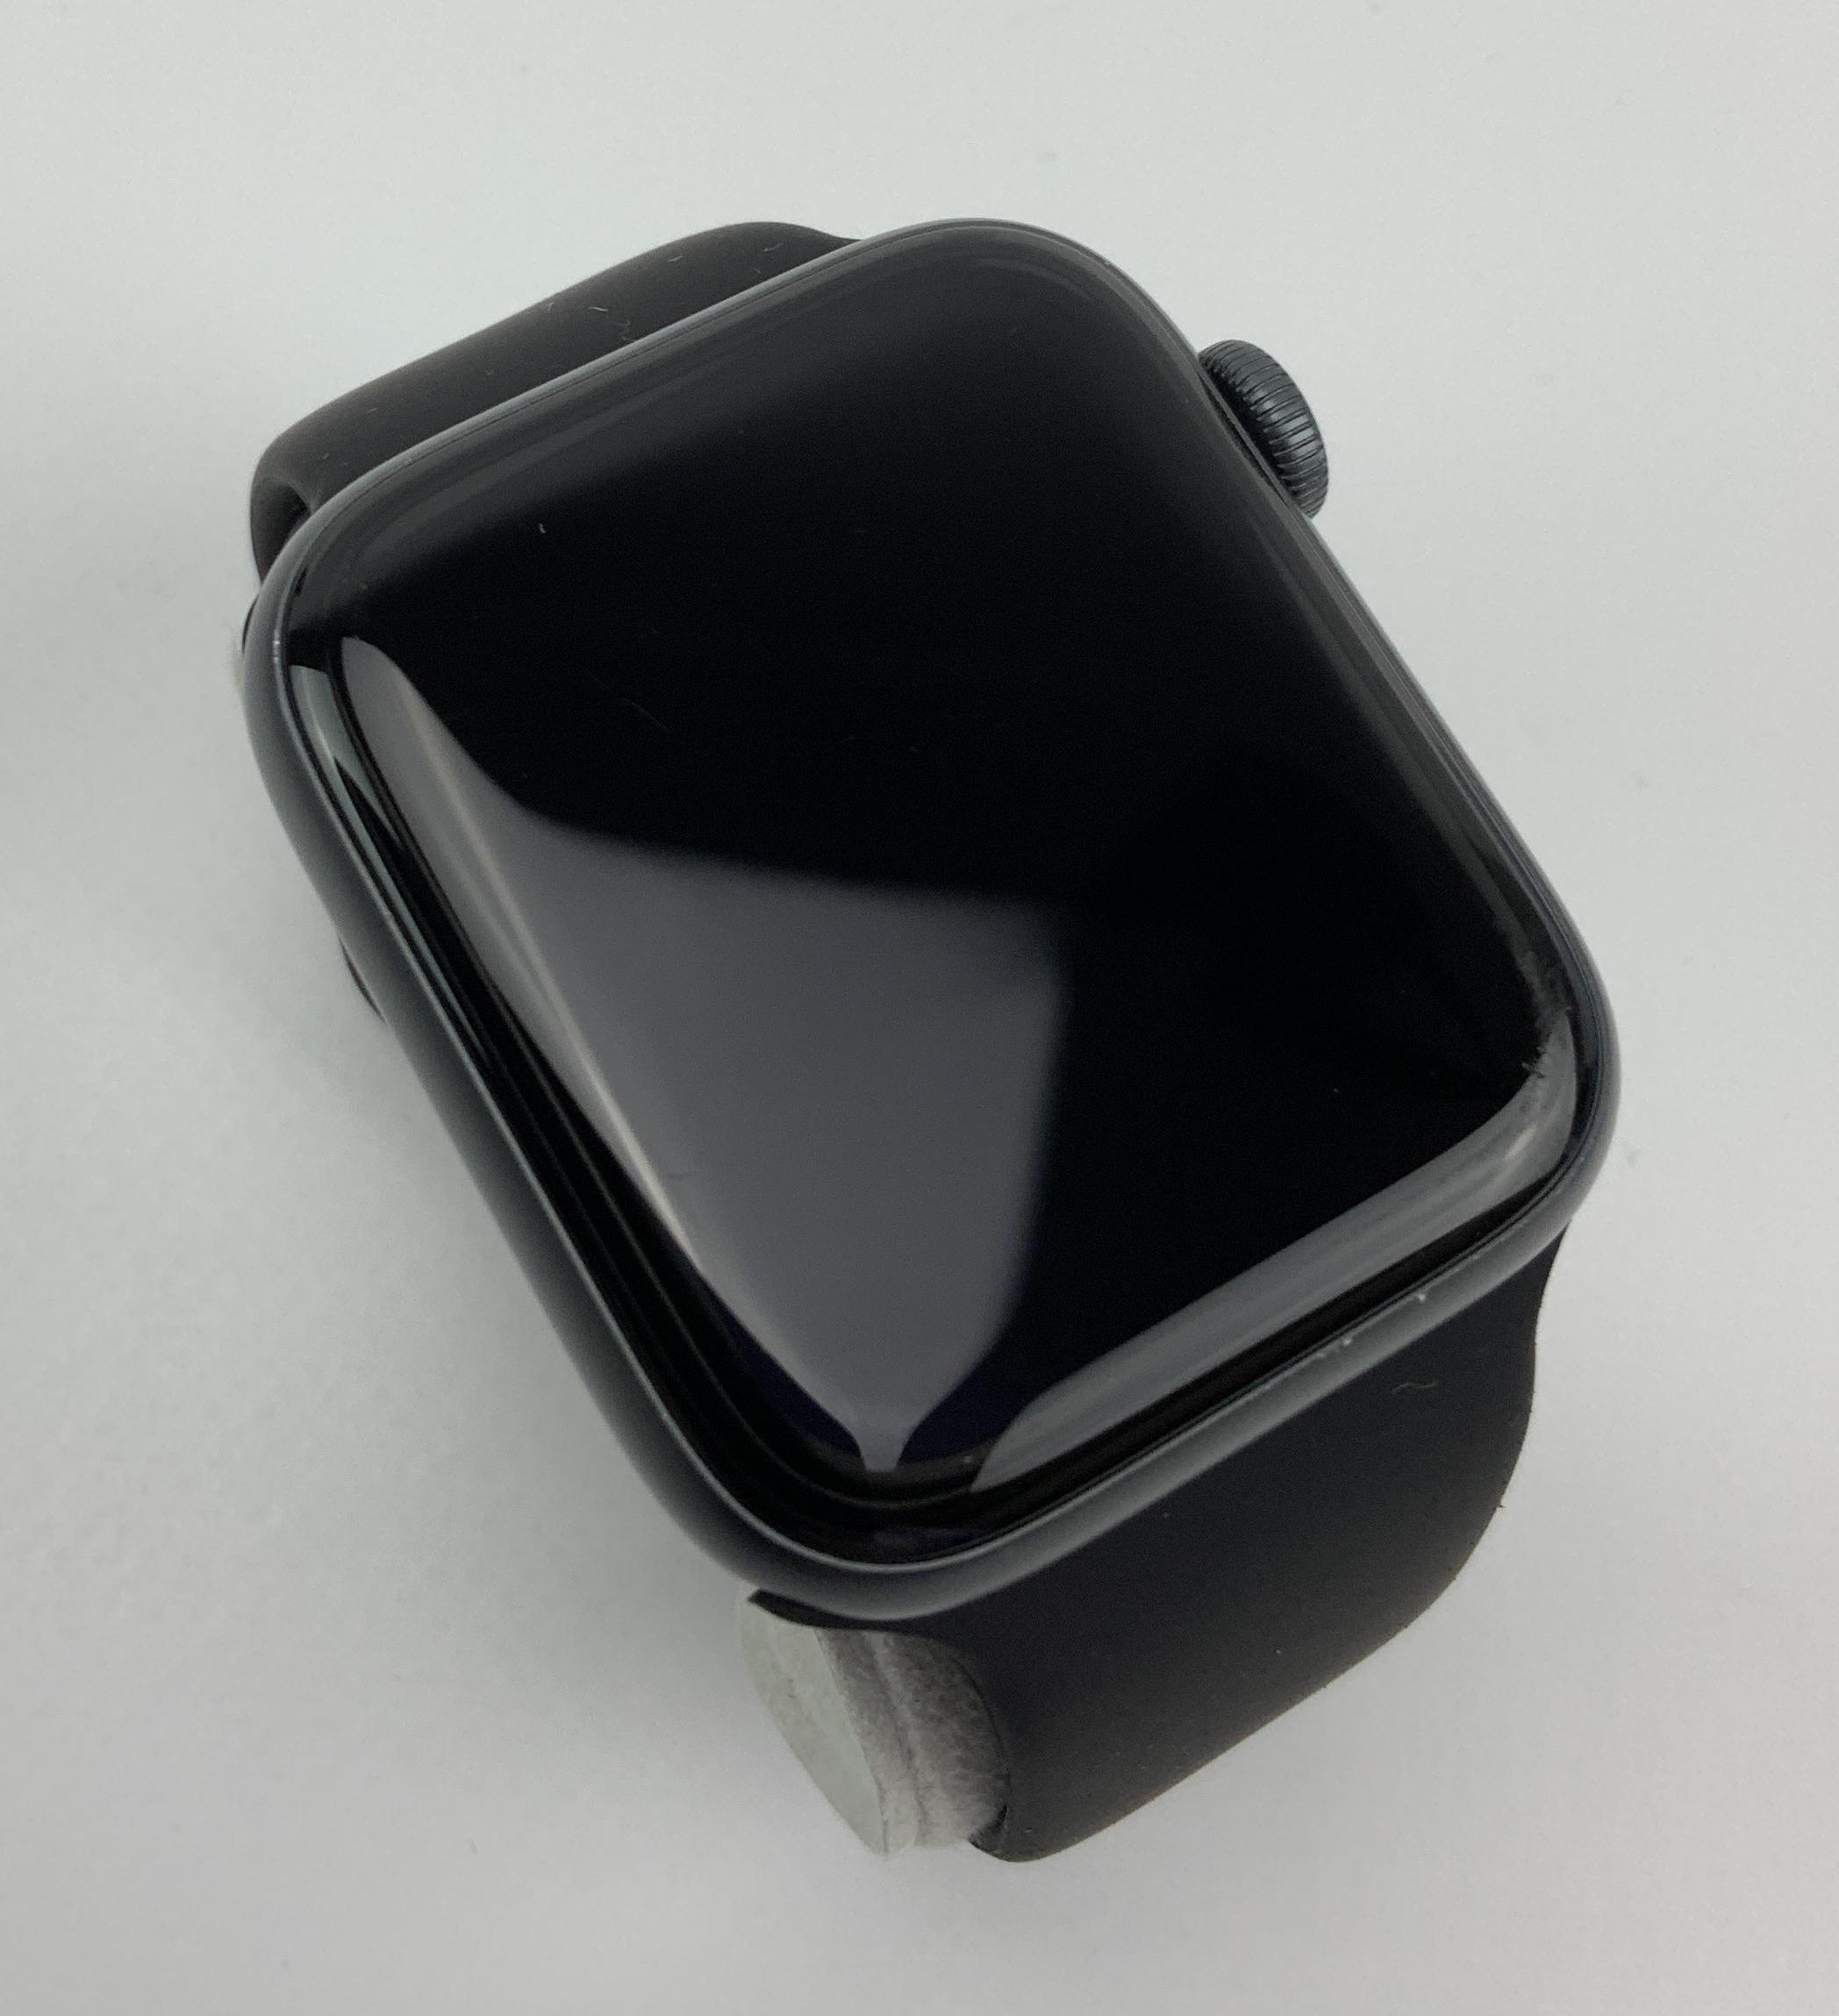 Watch Series 5 Aluminum (44mm), Space Gray, image 2